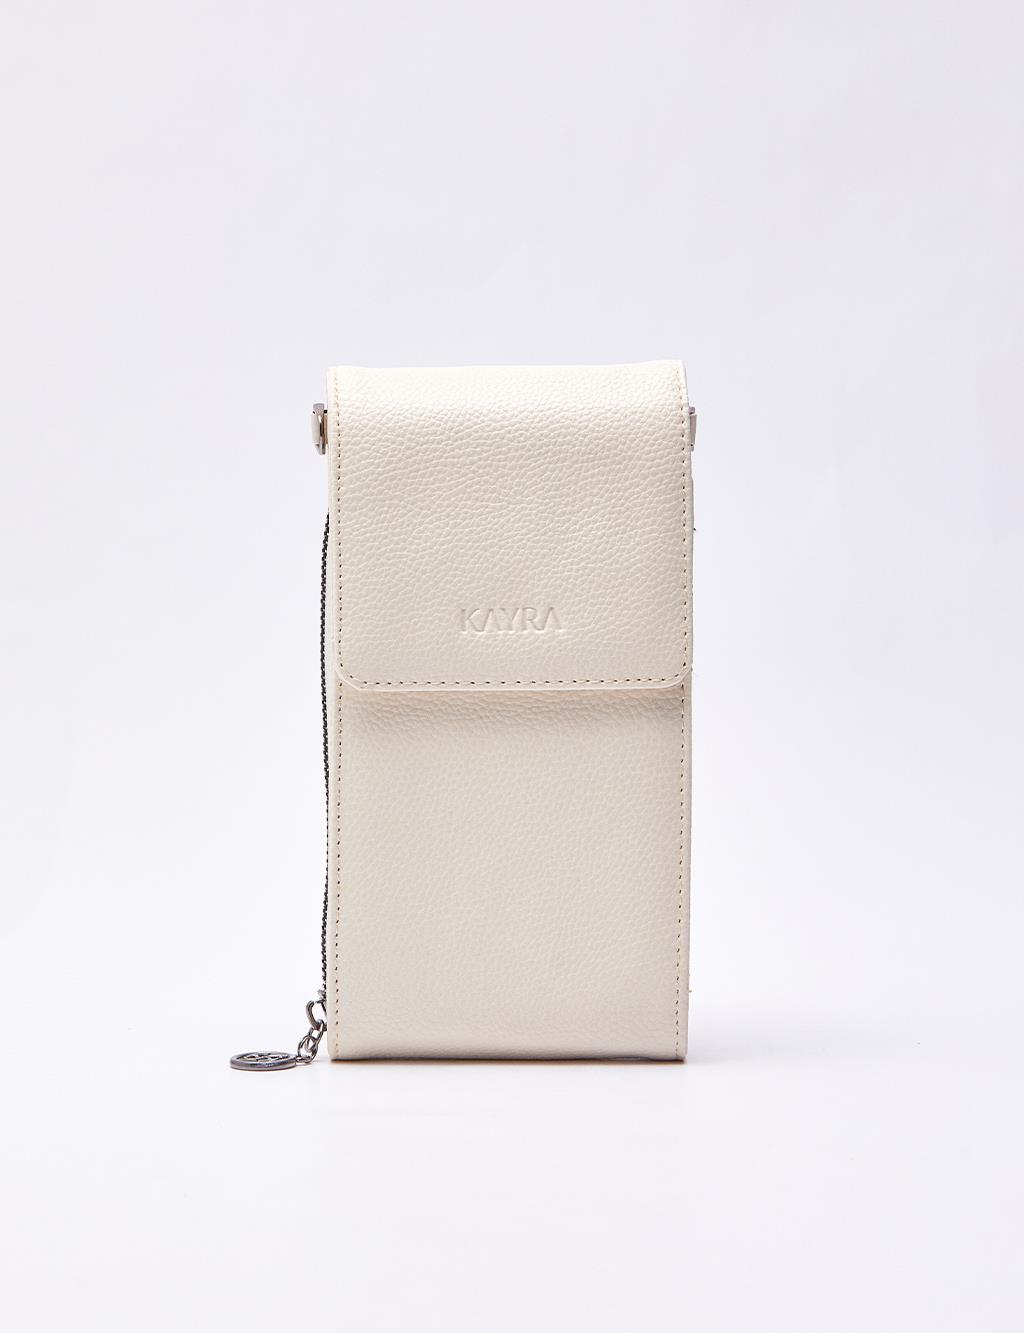 Natural Leather Covered Wallet Bag Cream